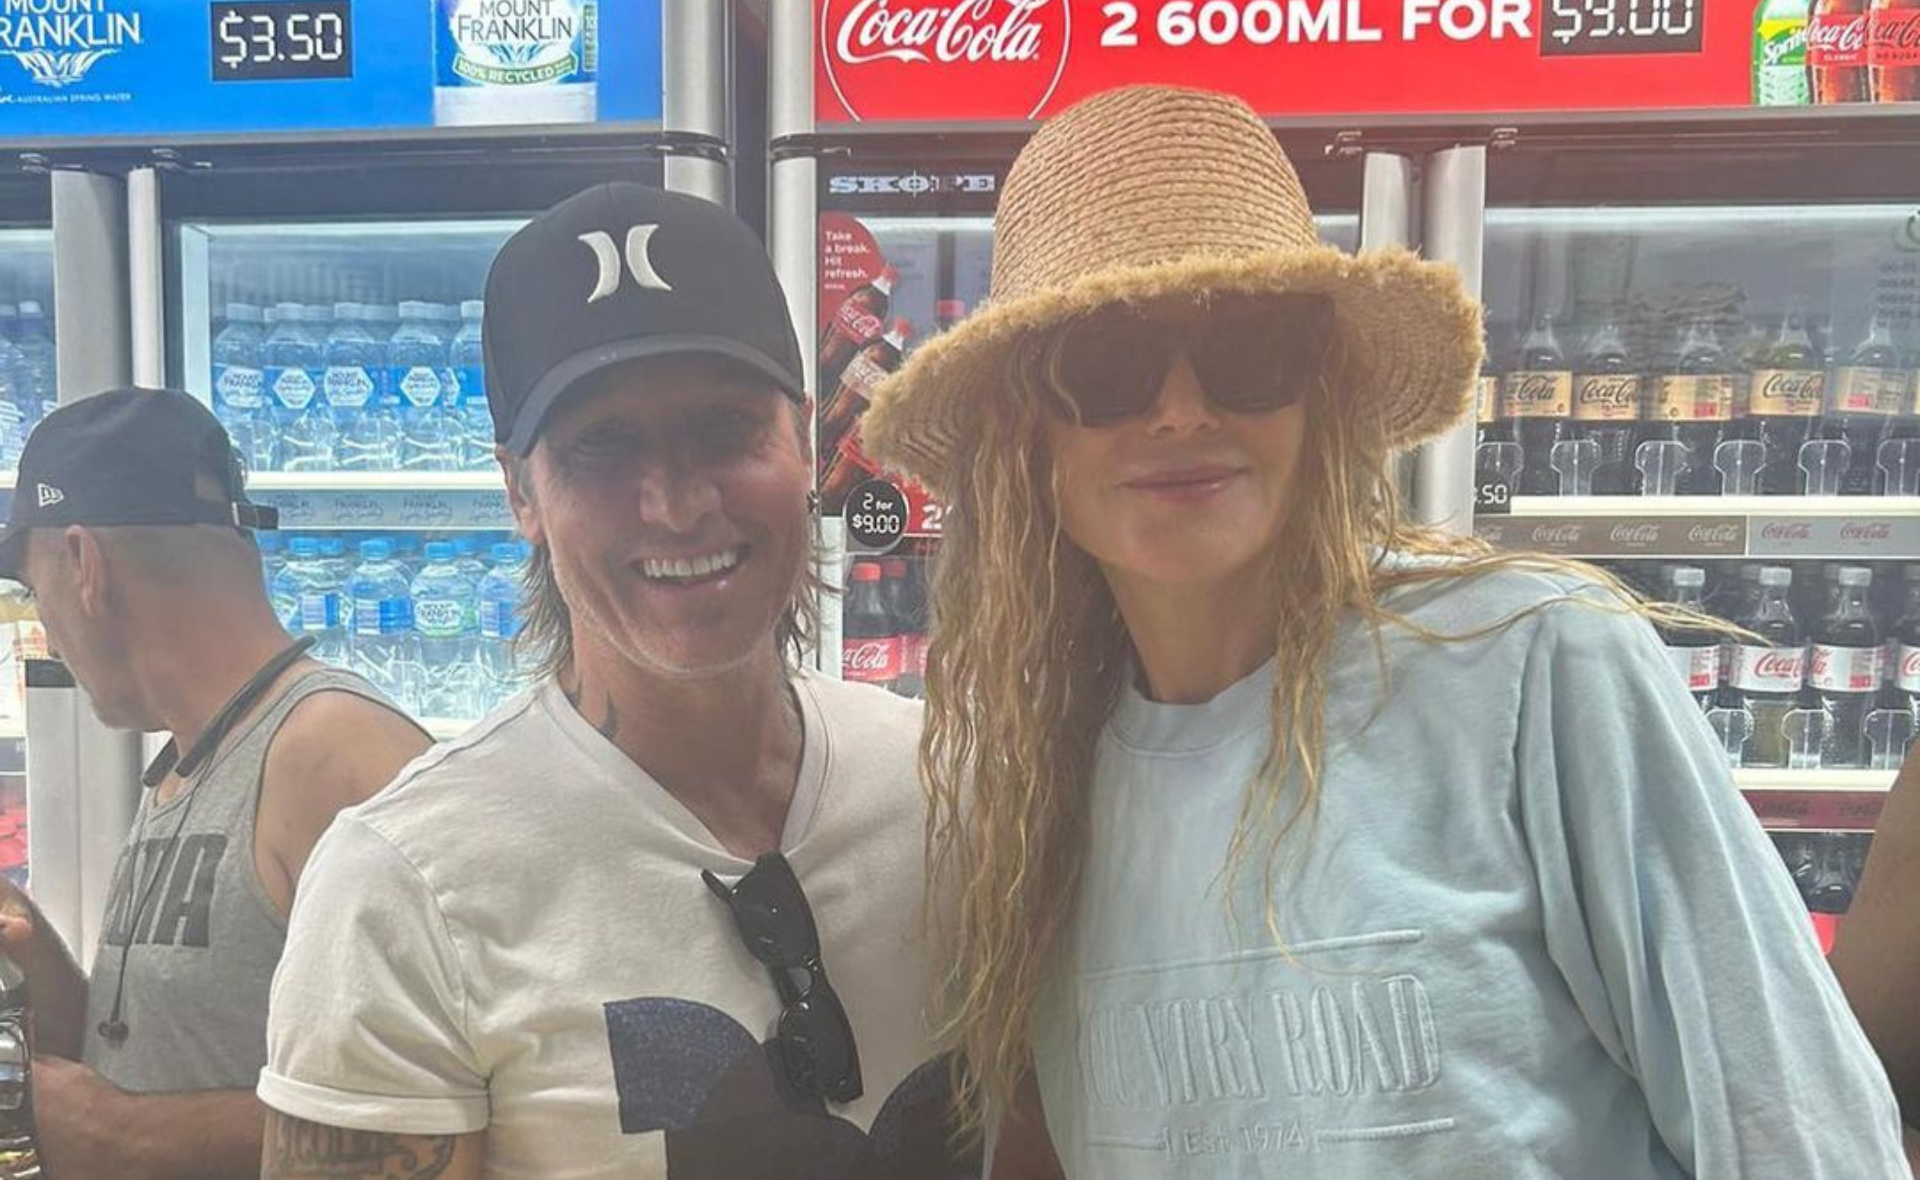 EXCLUSIVE: Kebab shop owner TELLS all about Nicole Kidman and Keith Urban